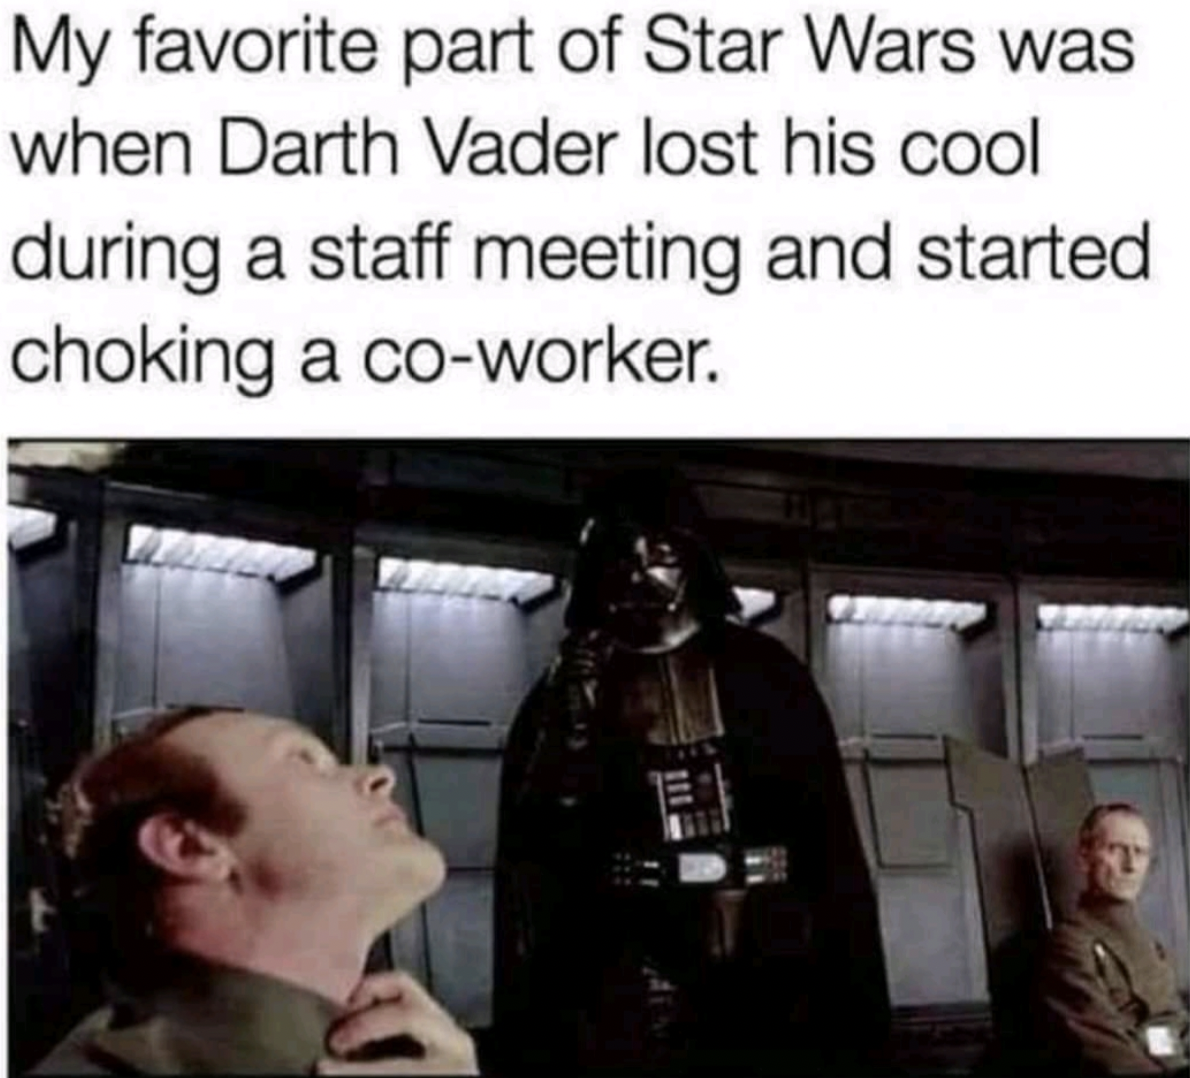 photo caption - My favorite part of Star Wars was when Darth Vader lost his cool during a staff meeting and started choking a coworker.